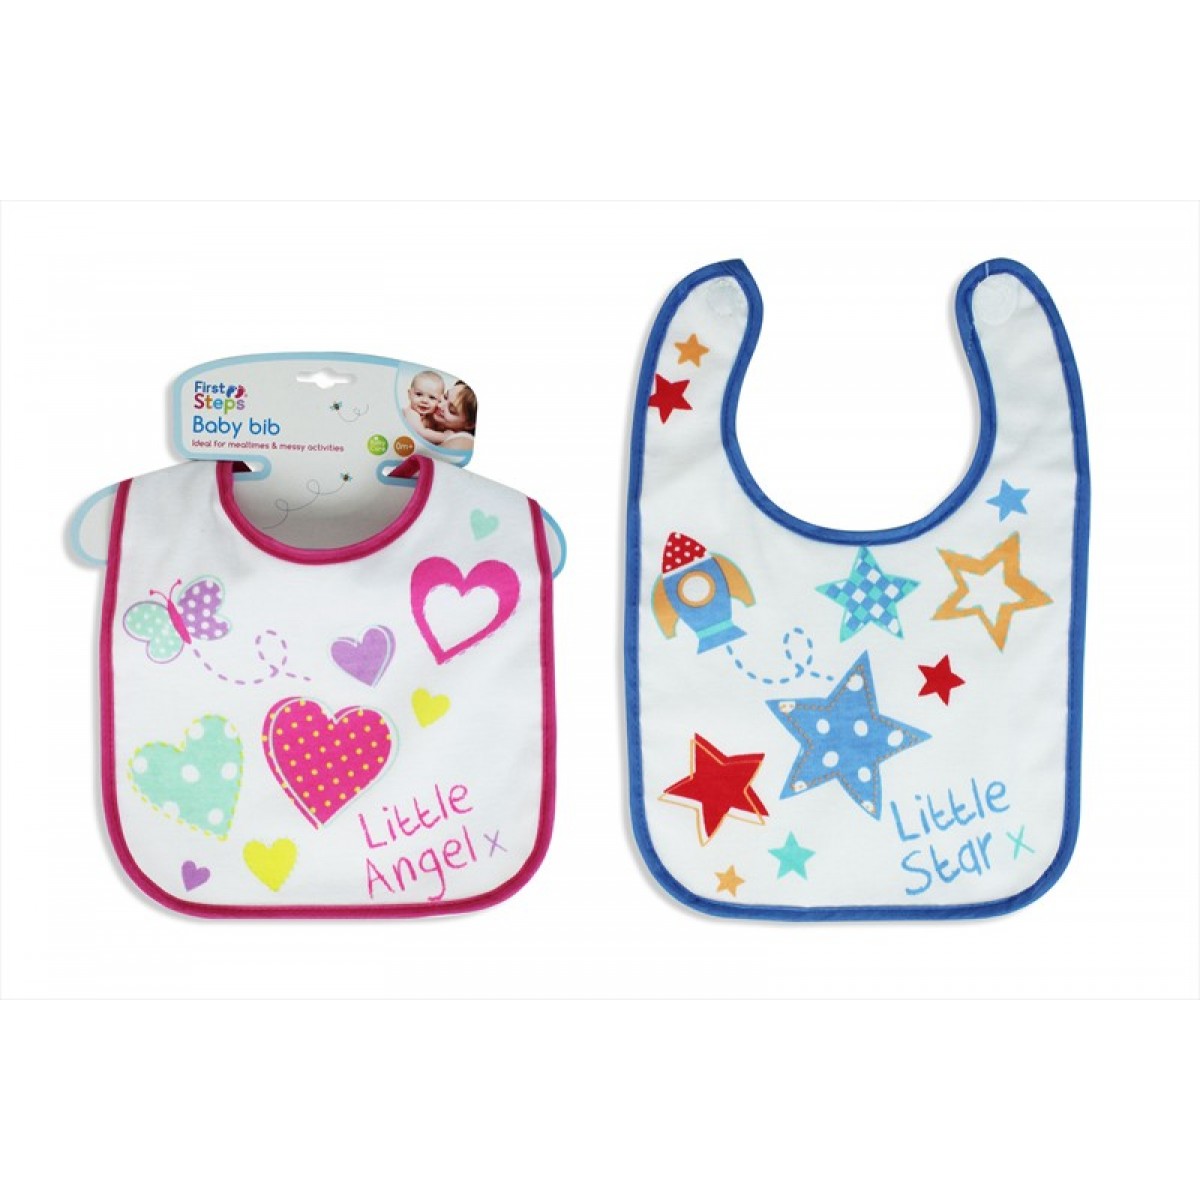 2-assorted-baby-dribble-feeding-bibs-pink-and-blue